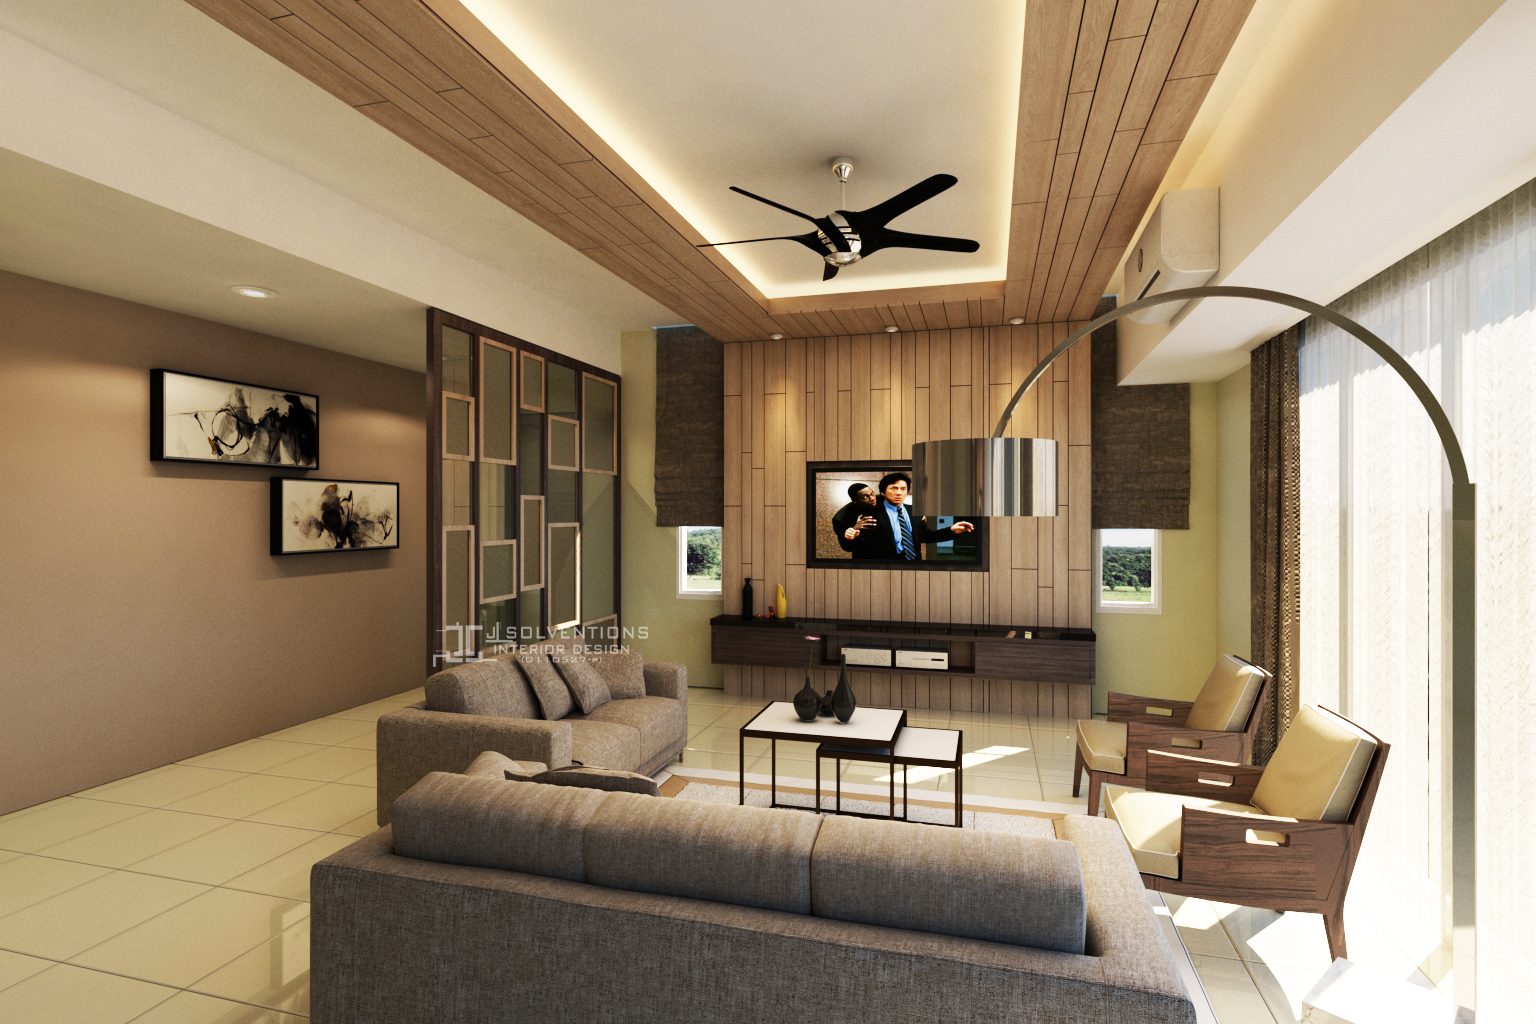 Concept Home with Wood Cove Ceiling. Project by: J Solventions Interior Design